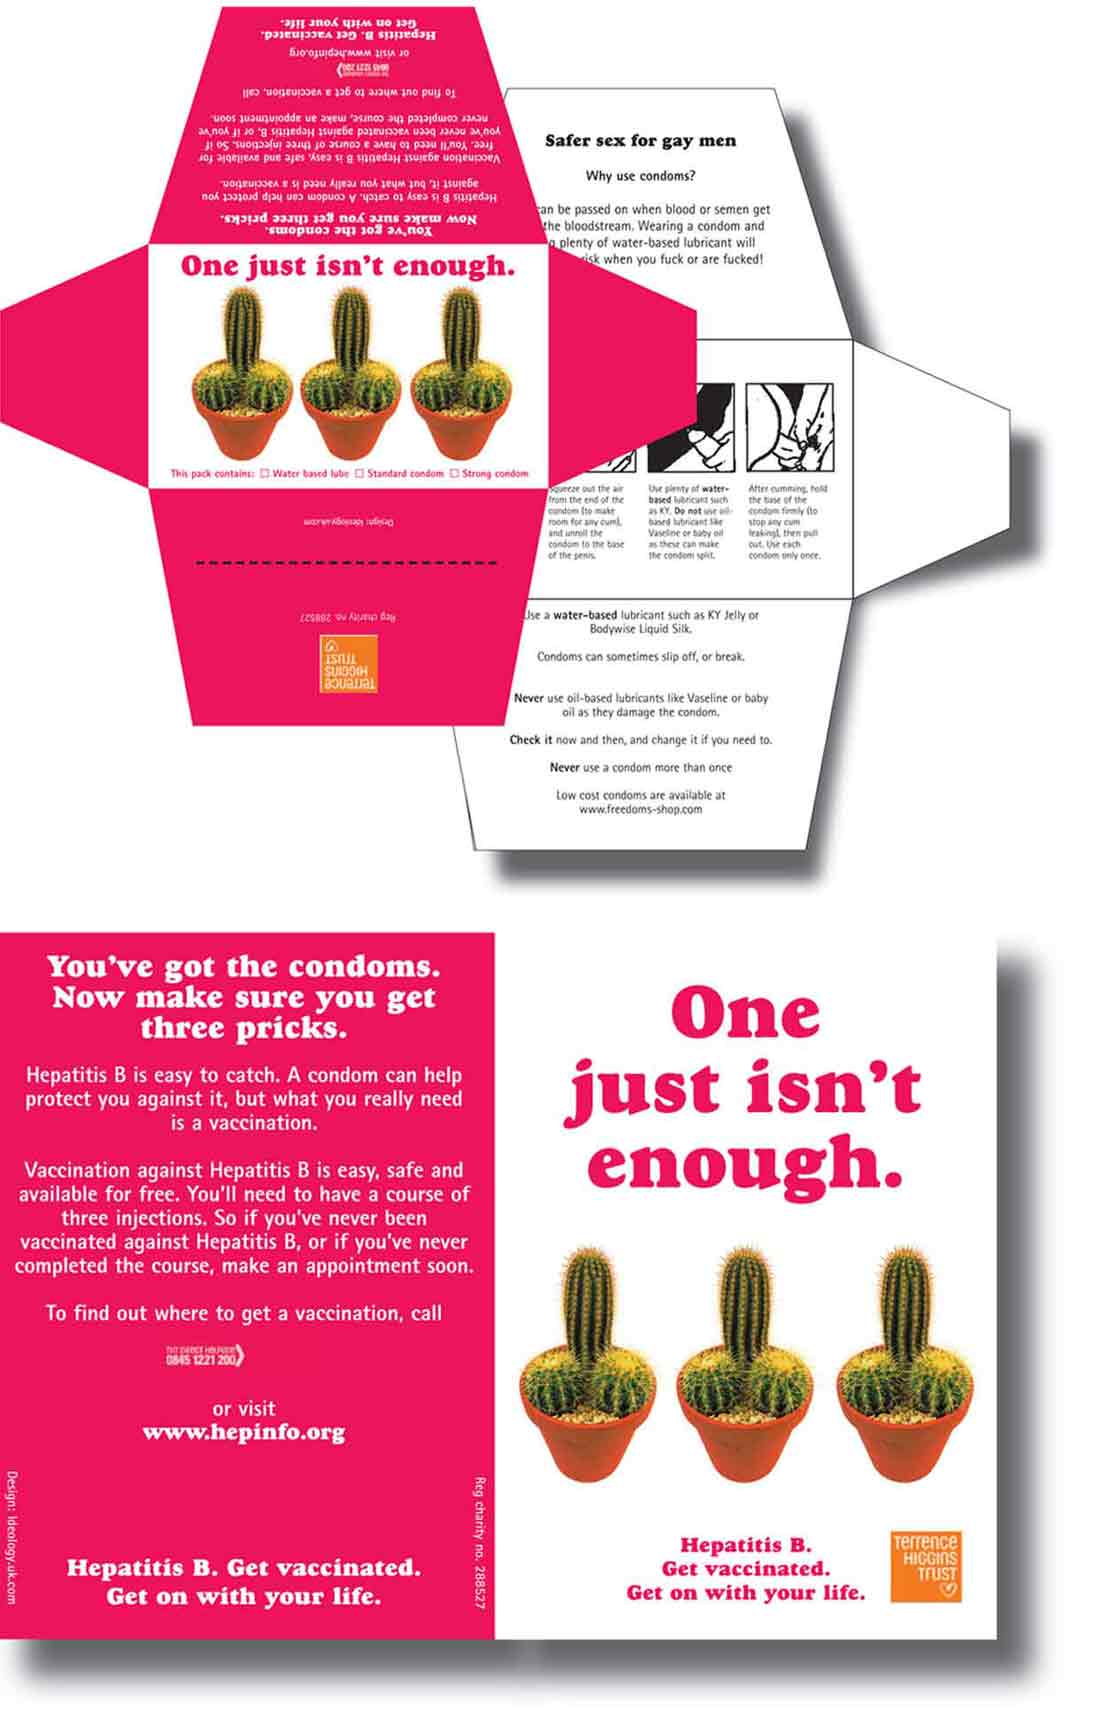 Terence Higgins Trust Hepatitis B "Three Pricks" campaign condom pack and postcard designed by ideology.uk.com